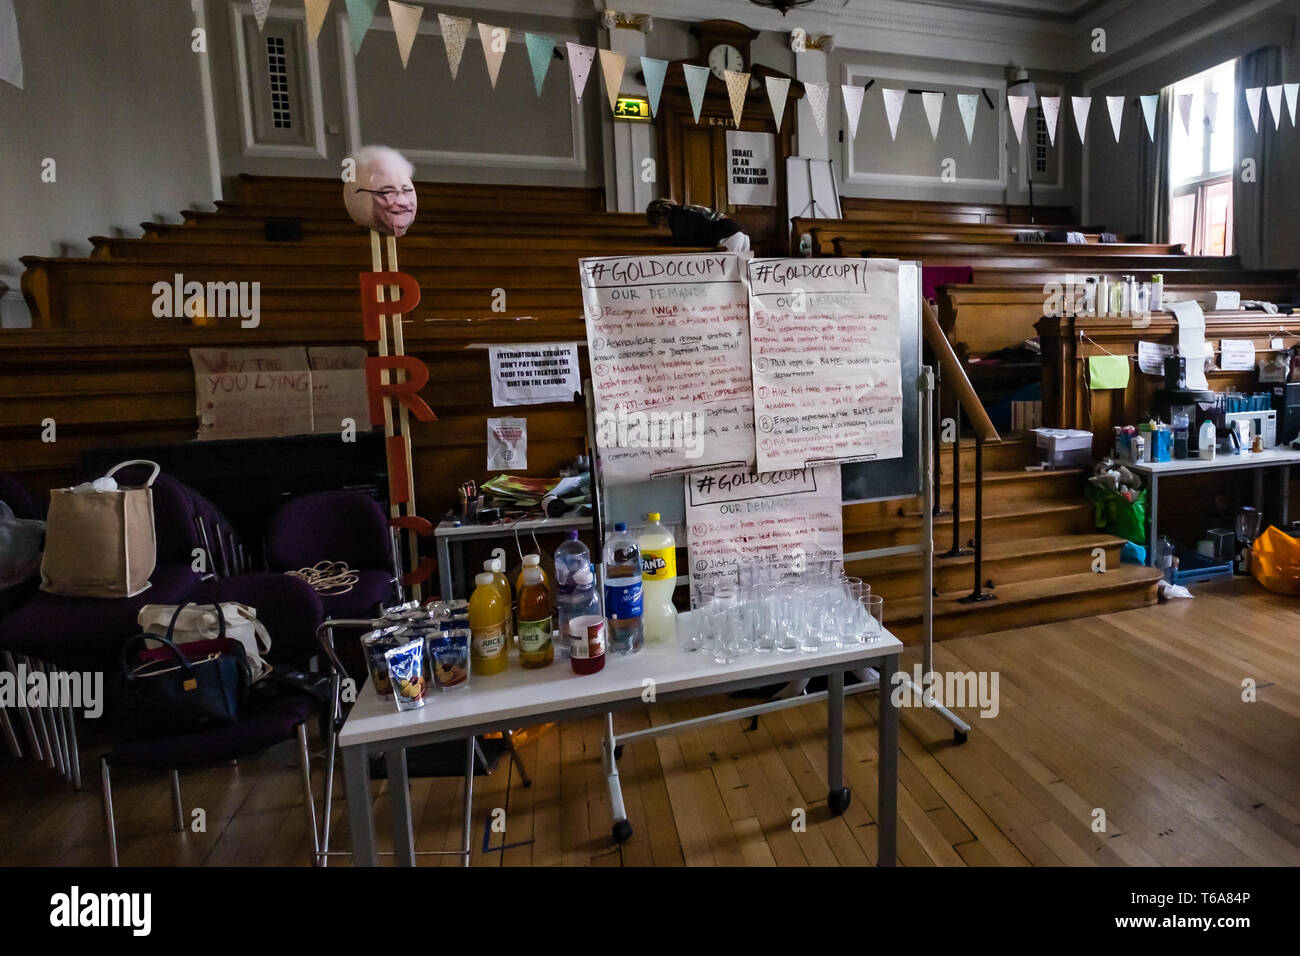 London, UK. 30th April 2018. Goldsmiths Anti-Racist Action celebrate 50 days of occupation of the management building, the former Deptford Town Hall with a party. The occupation began when the university failed to respond adequately to racist abuse of a candidate in the student elections. Students claim the university fails to treat BAME students and workers fairly, and among other demands insist Goldsmiths produces a strategic plan to tackle racism. Credit: Peter Marshall/Alamy Live News Stock Photo